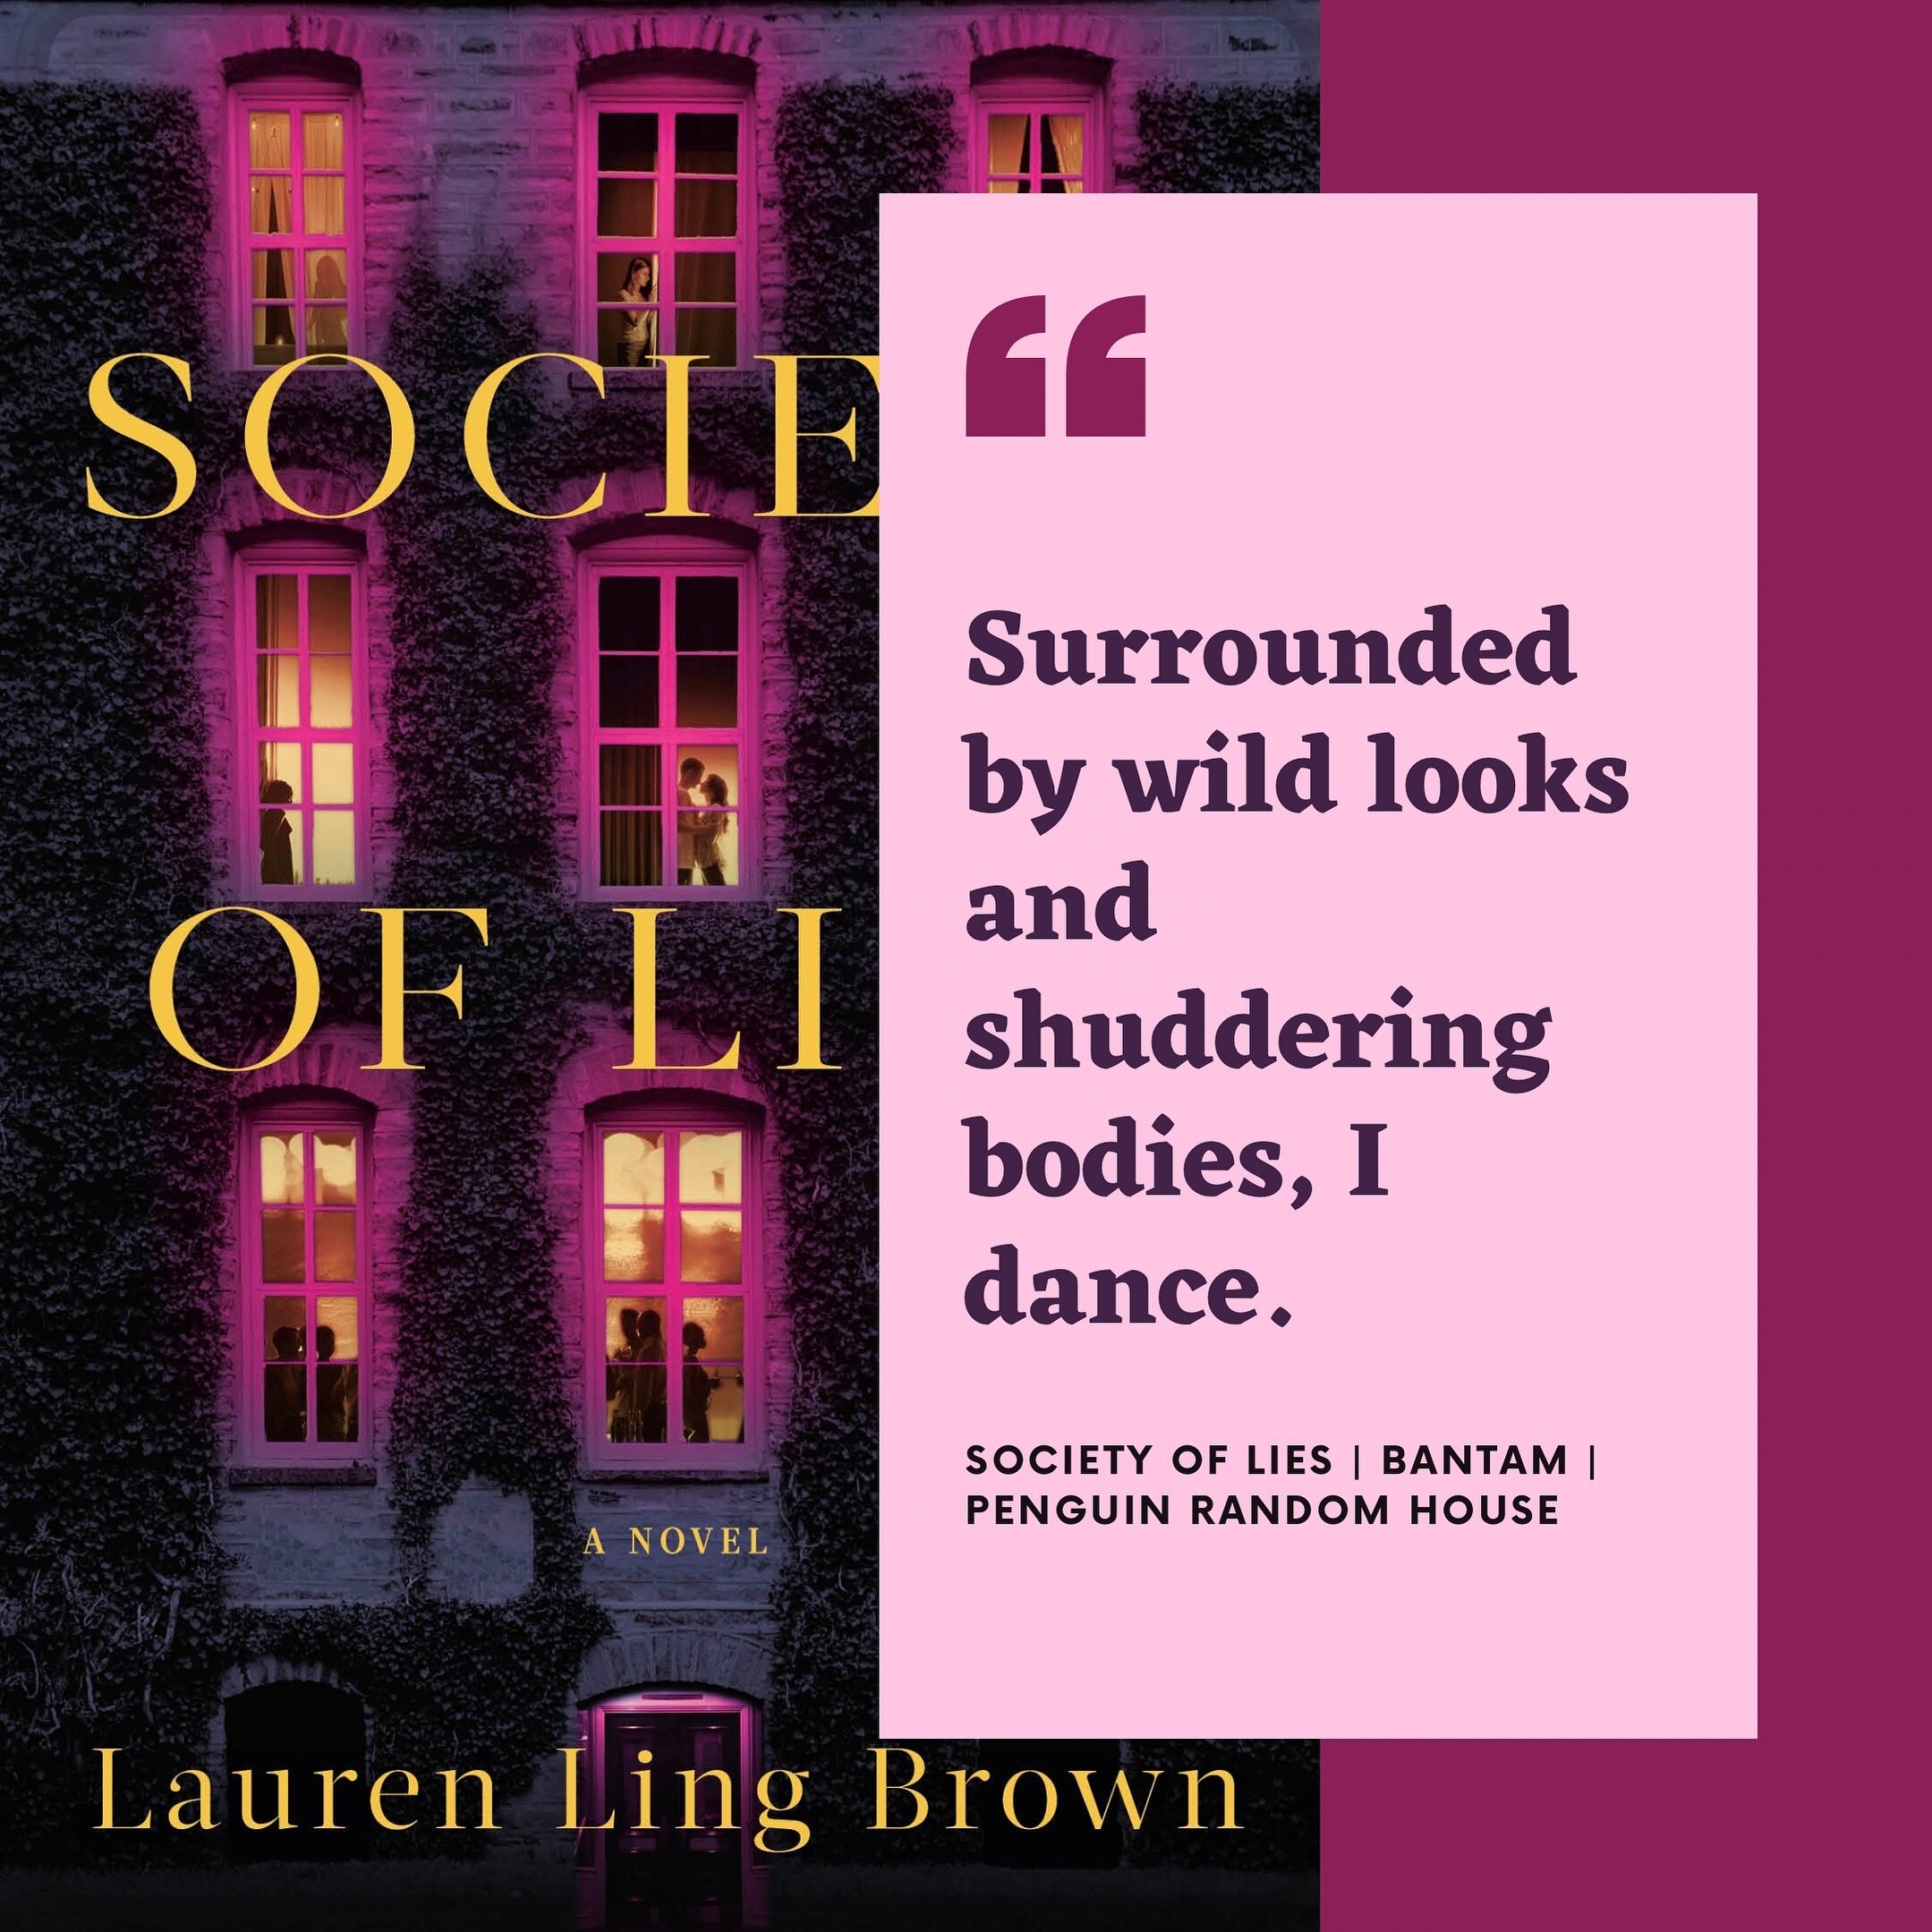 Bantam and Penguin Random House are hosting a Goodreads Giveaway! 👀📖 You can have the chance to win a free copy of Society of Lies! Enter in the link in my bio.

Thank you to my marketing team for organizing this and helping to get the book to read